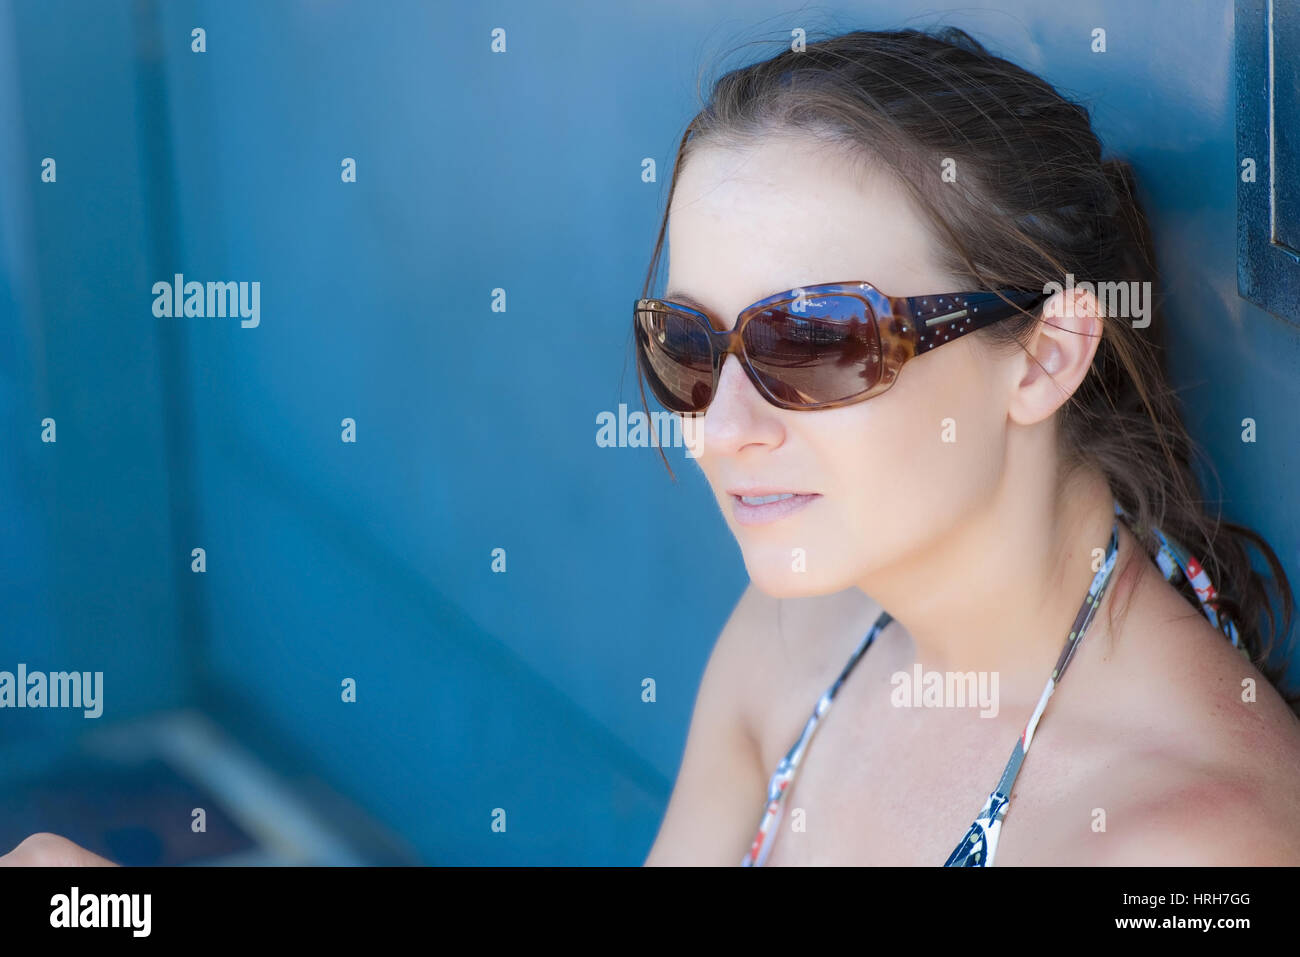 Model released, Junge Frau mit Sonnenbrille - woman with shades Stock Photo